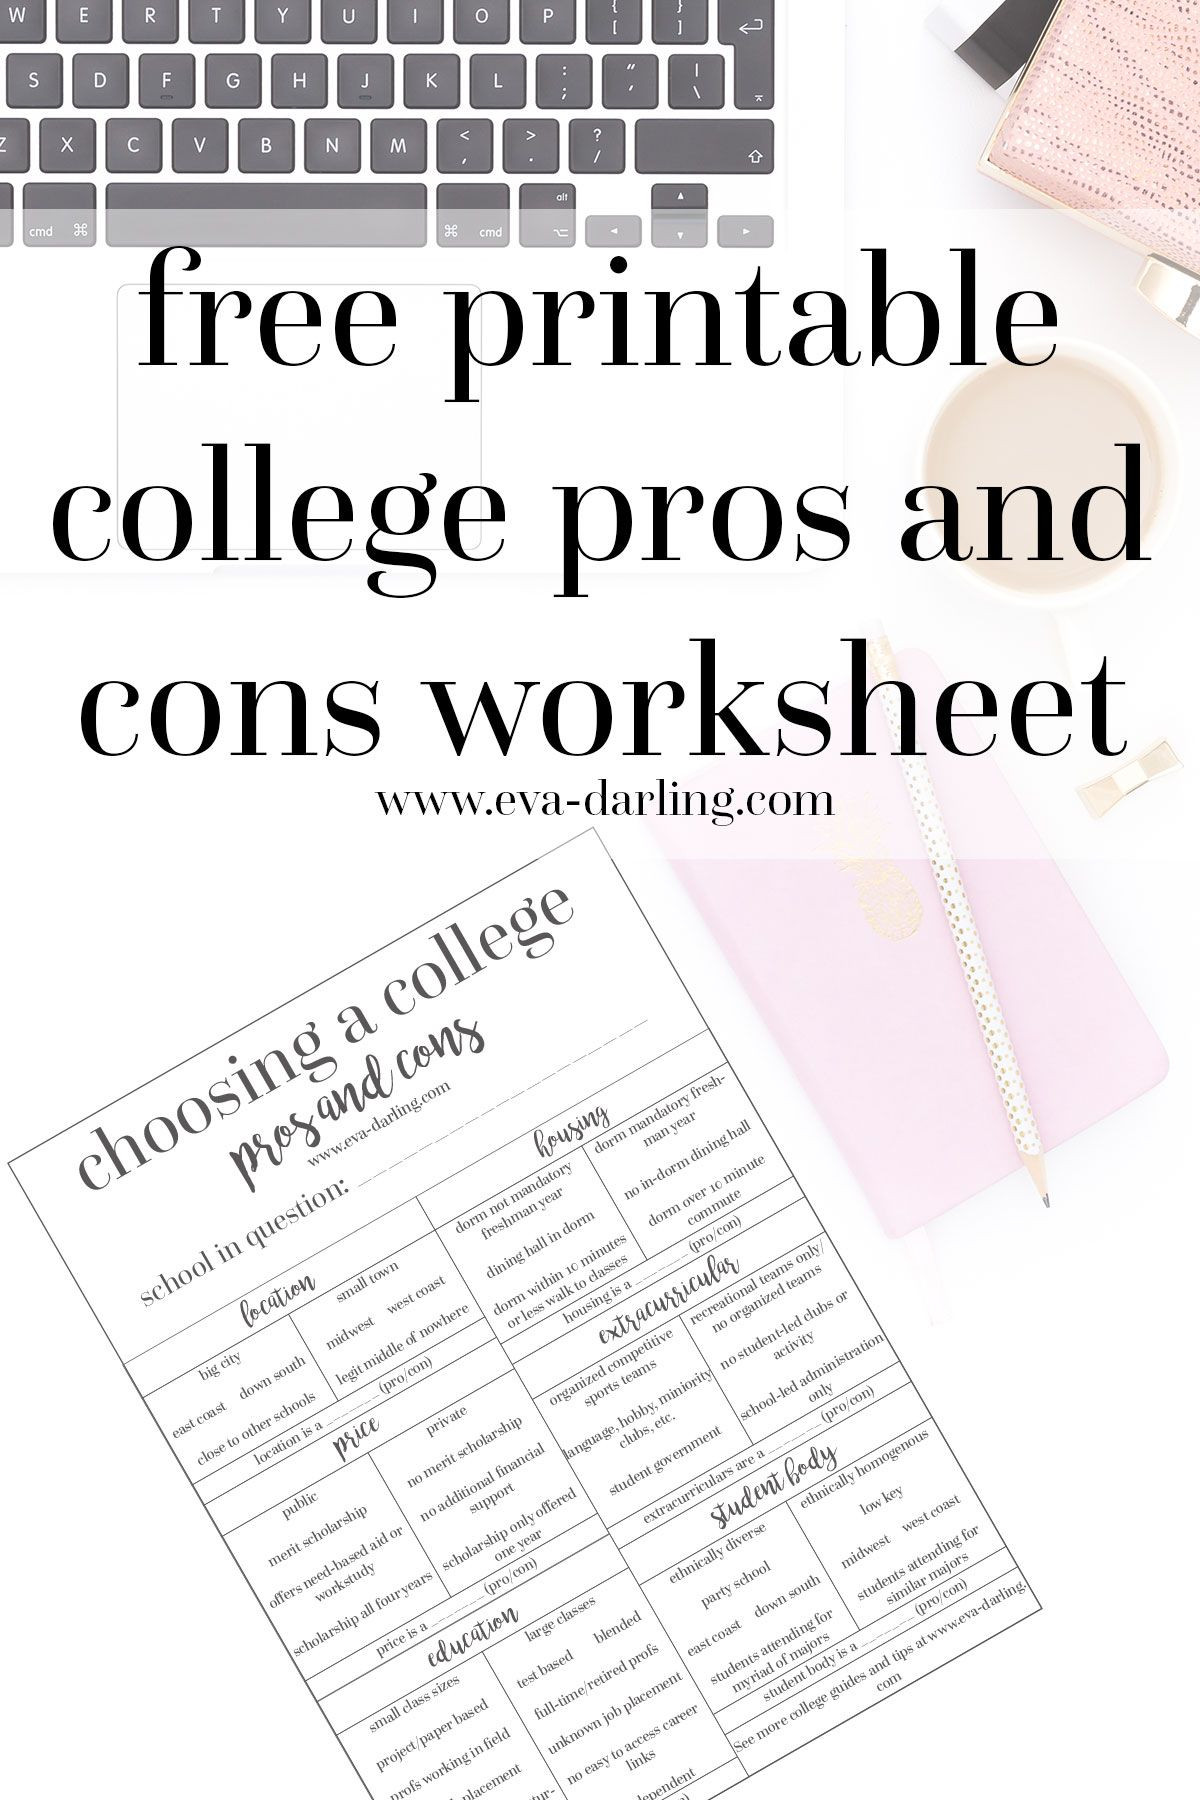 Choosing A College Worksheet How to Determine Your College Pros and Cons Free Printable